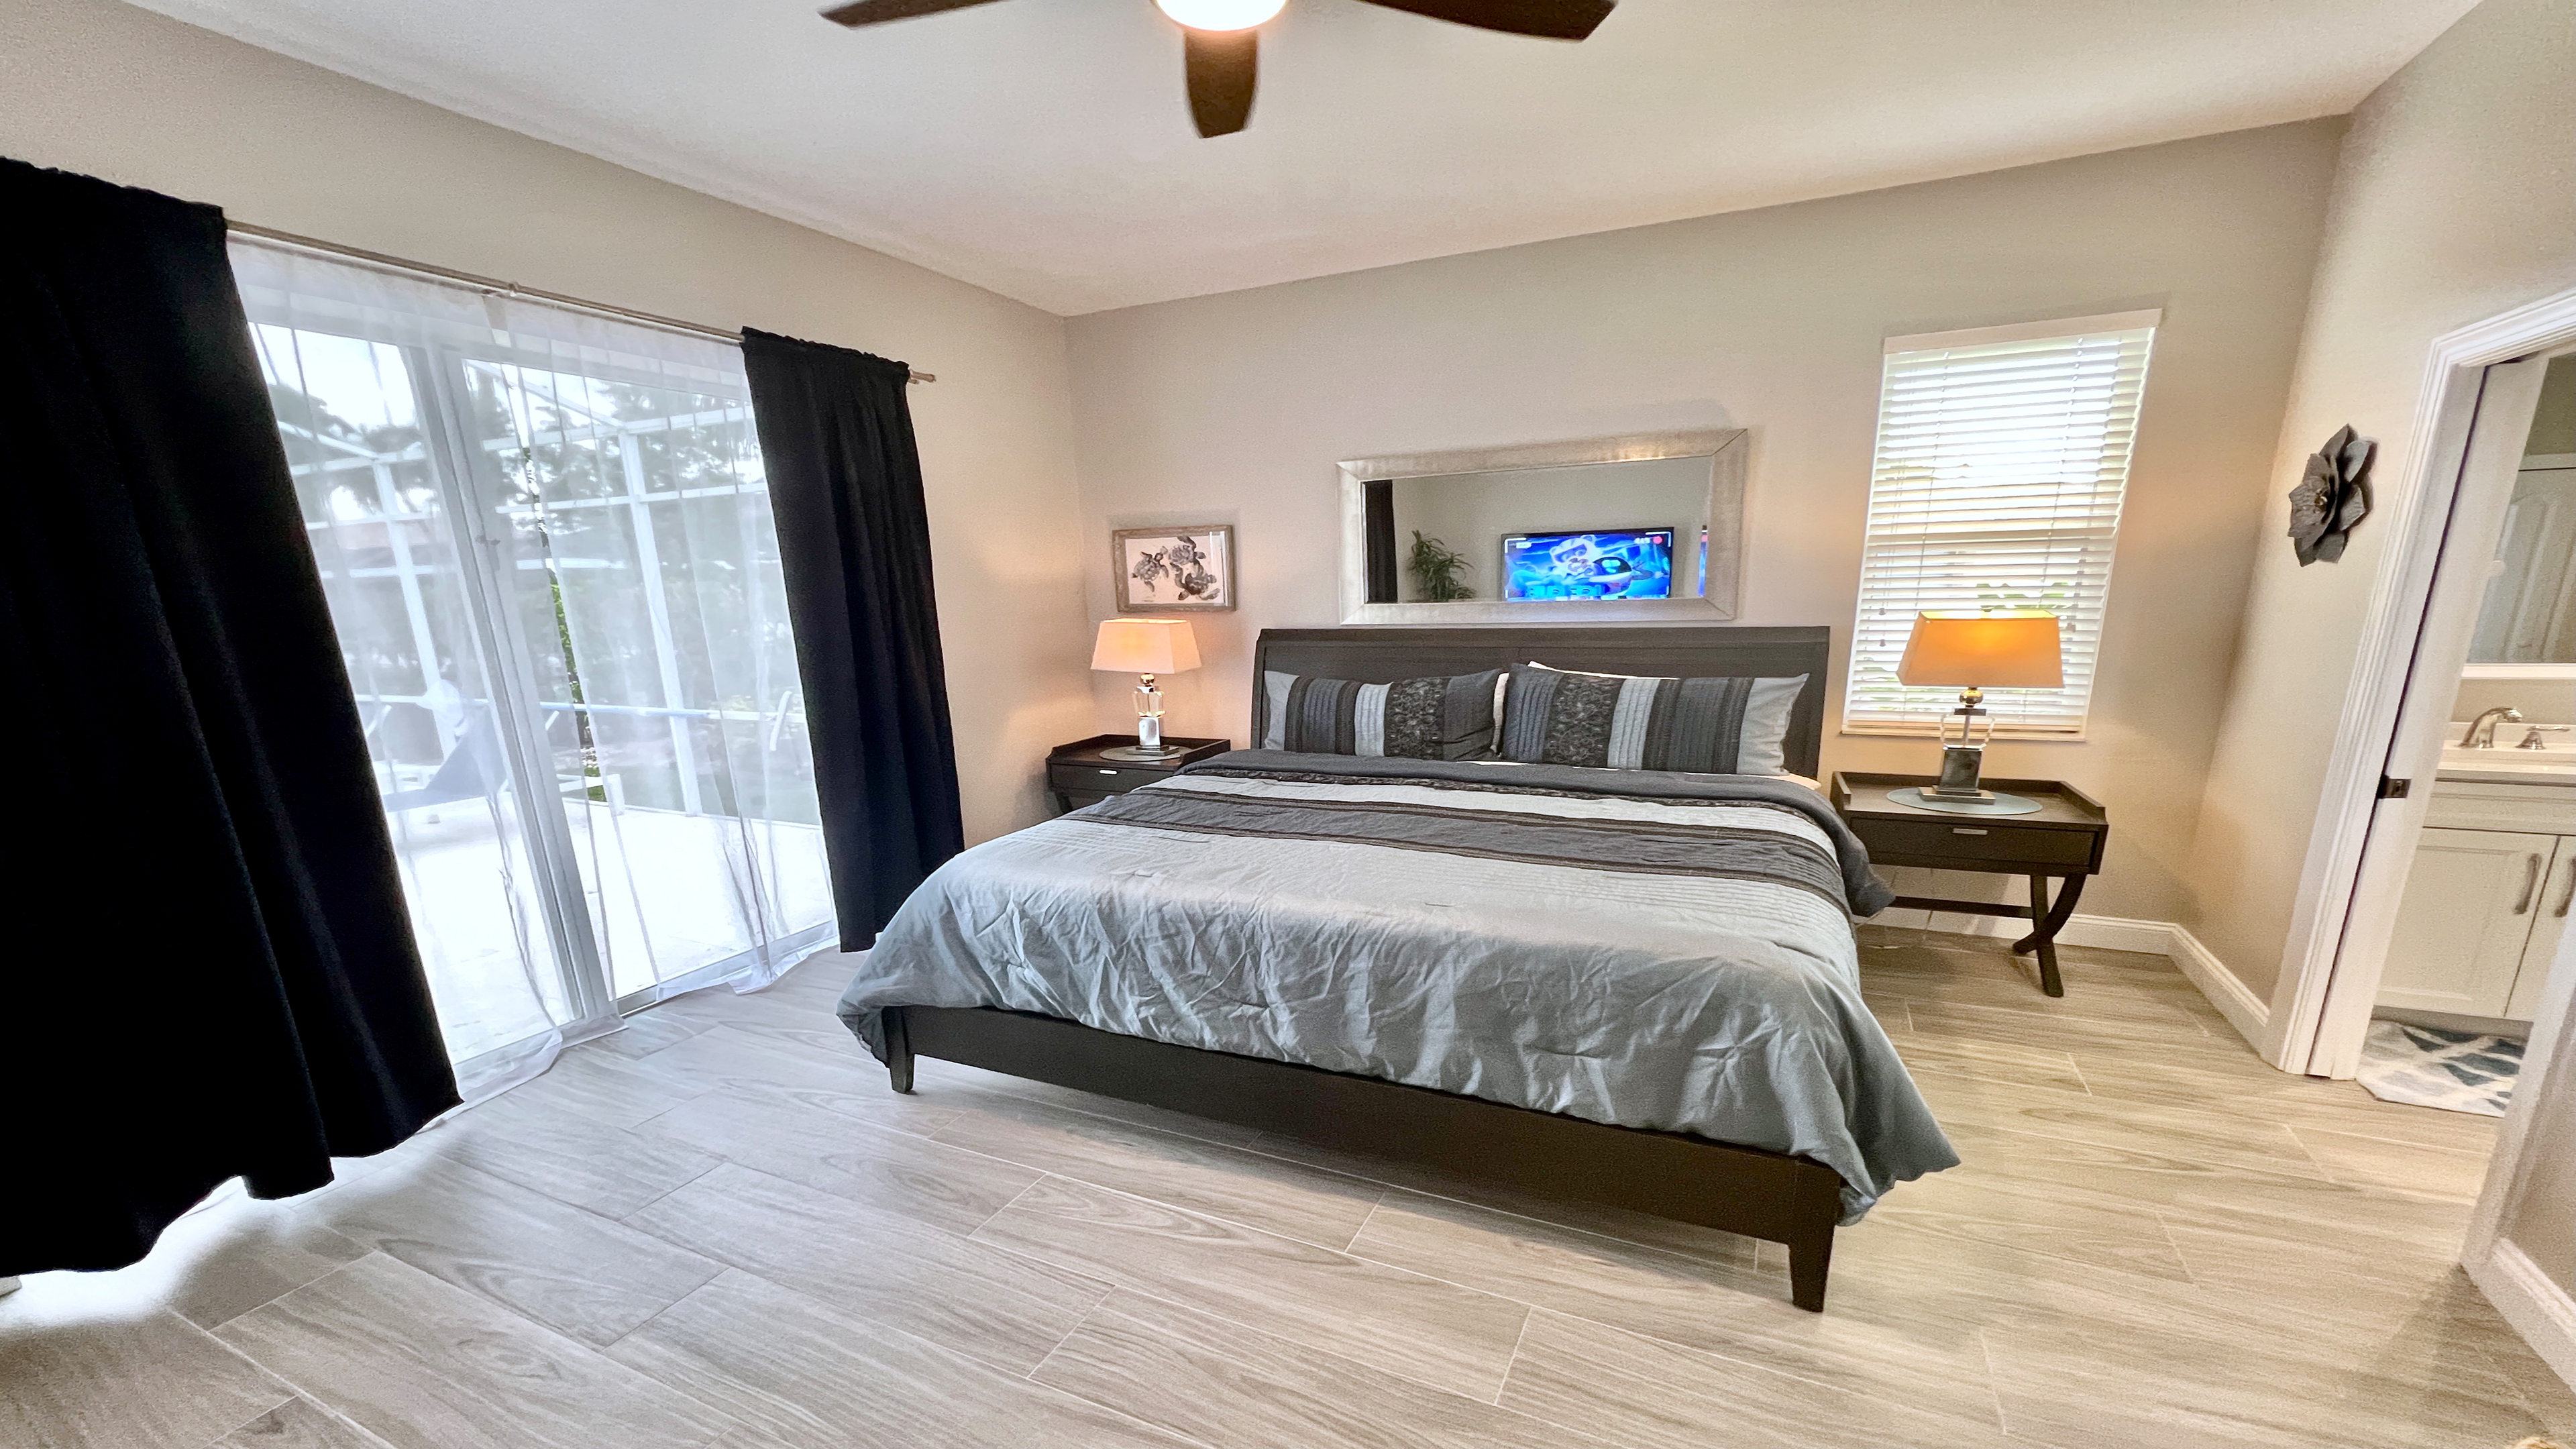 The master bedroom offers a King size bed